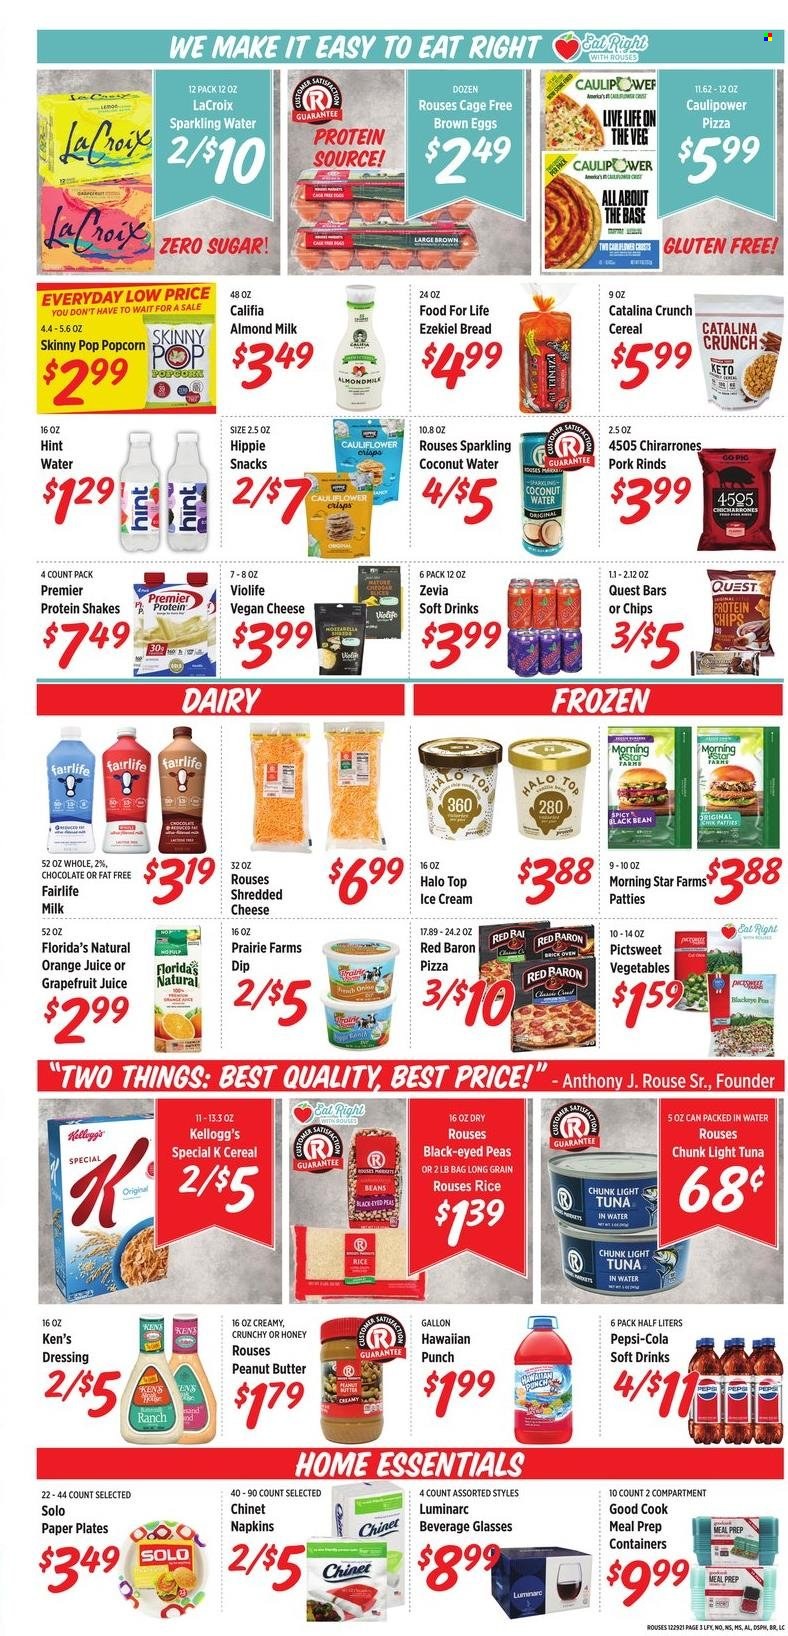 thumbnail - Rouses Markets Flyer - 12/29/2021 - 01/05/2022 - Sales products - bread, beans, peas, tuna, pizza, shredded cheese, almond milk, protein drink, shake, eggs, cage free eggs, dip, ice cream, Red Baron, snack, Kellogg's, Florida's Natural, popcorn, Skinny Pop, tuna in water, light tuna, cereals, rice, dressing, peanut butter, Pepsi, orange juice, juice, coconut water, soft drink, sparkling water, punch, napkins, paper plate. Page 3.